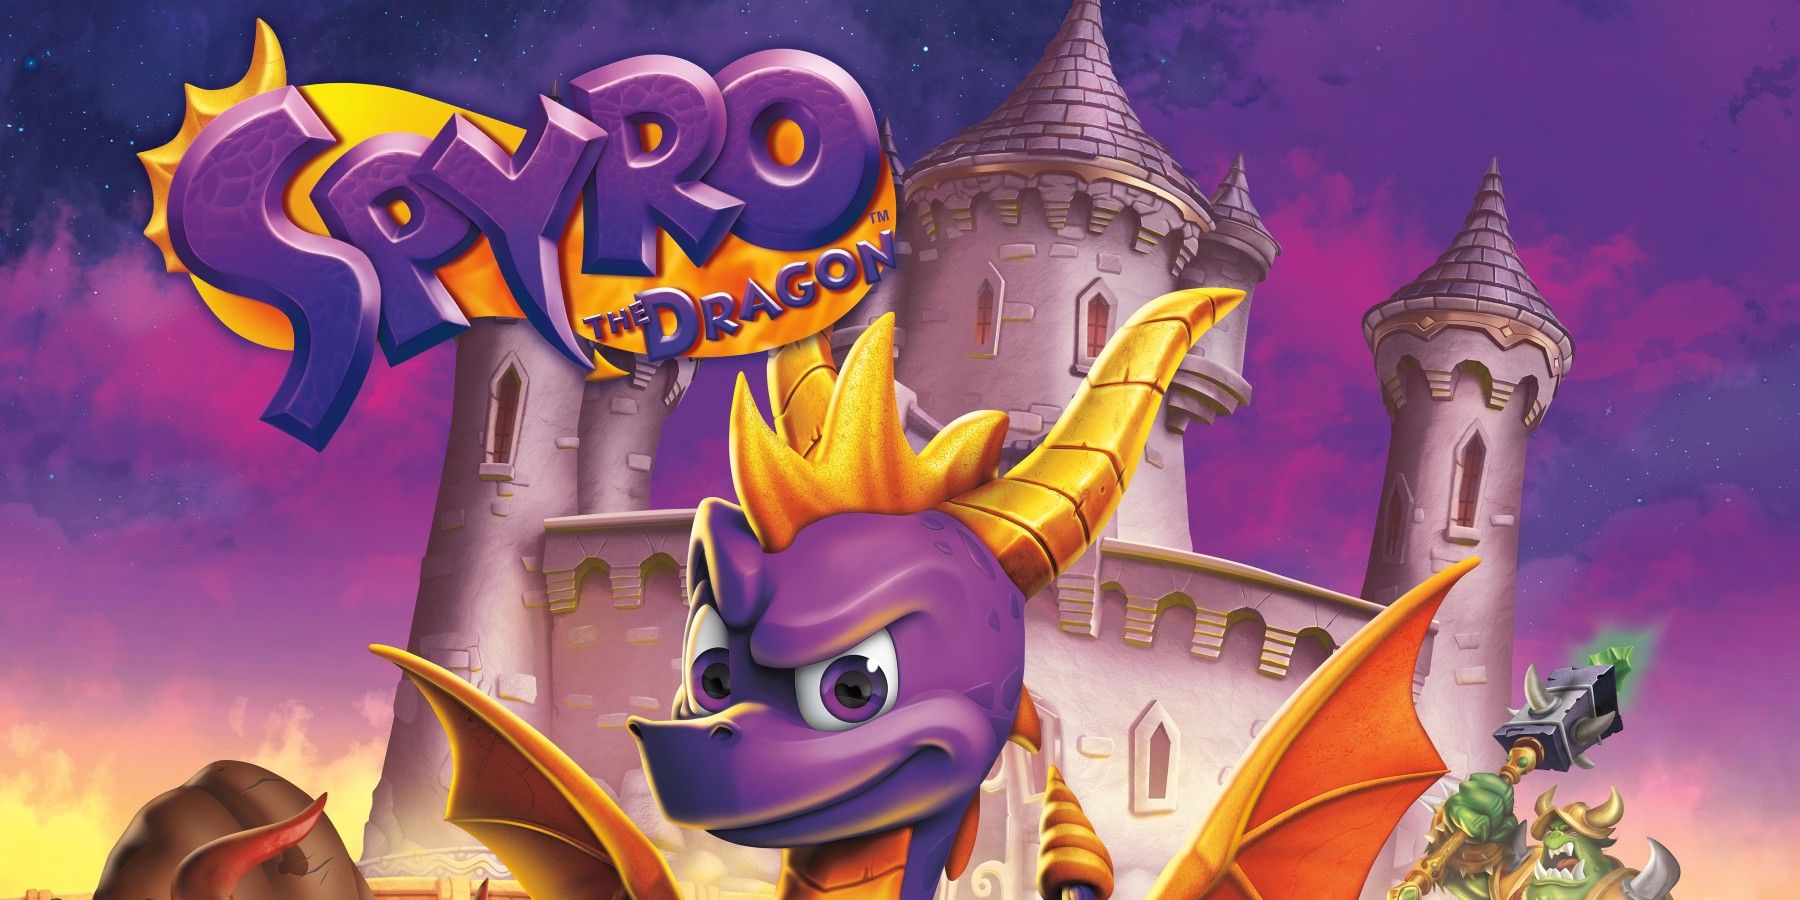 spyro-the-dragon-reignited-cover-art-first-game